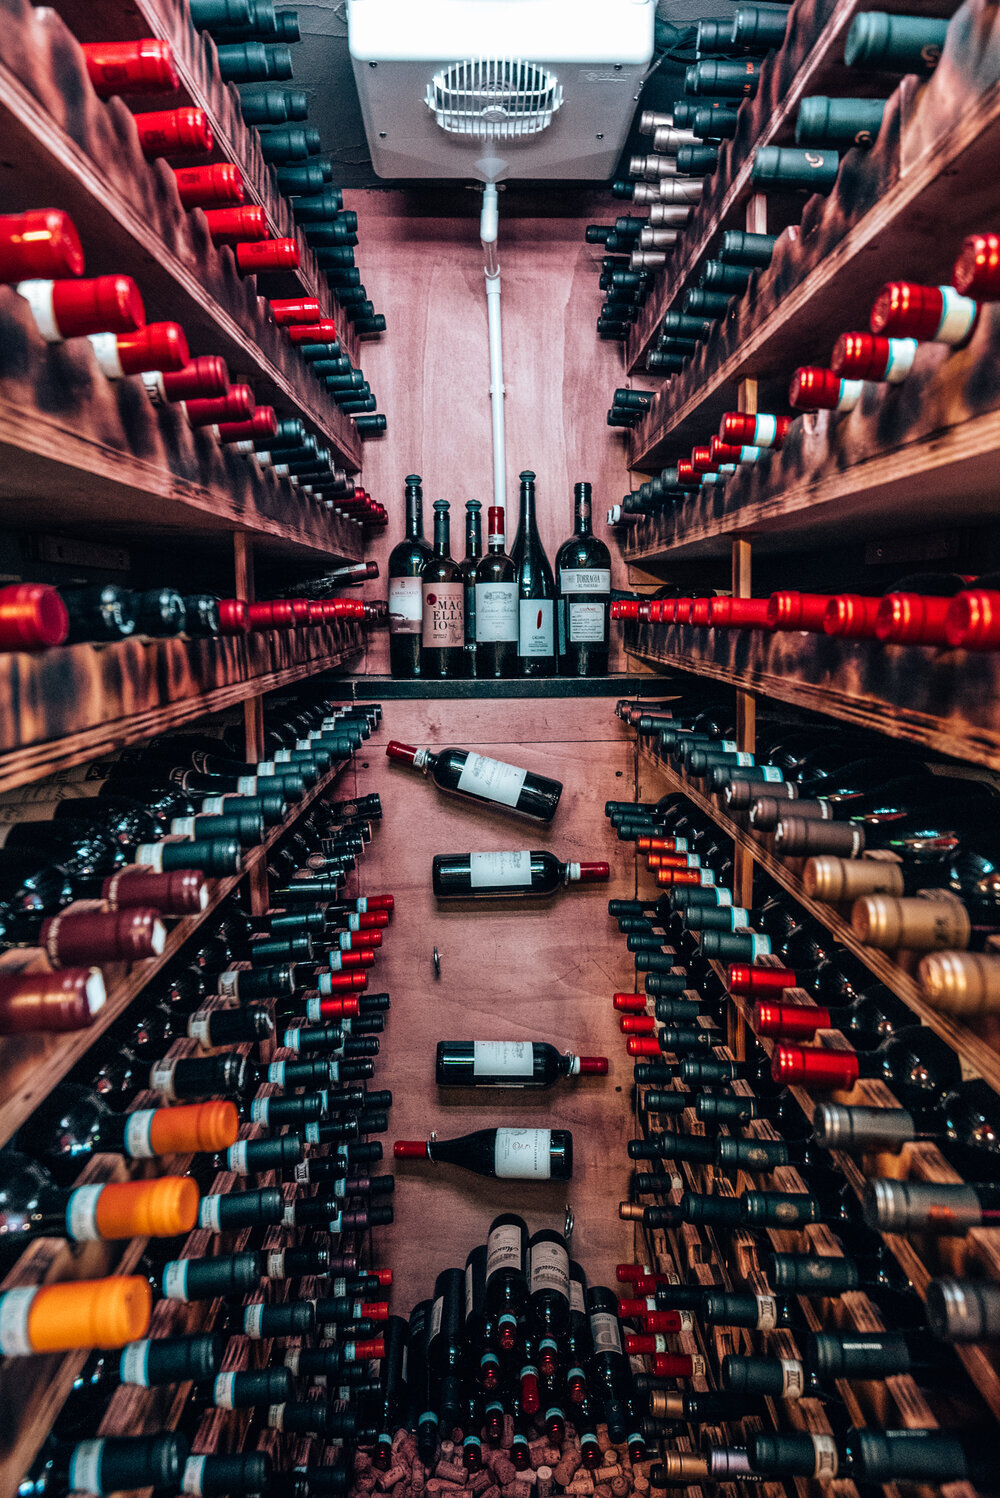 The ultimate wine cellar, London Drinks photography, Zodee Media